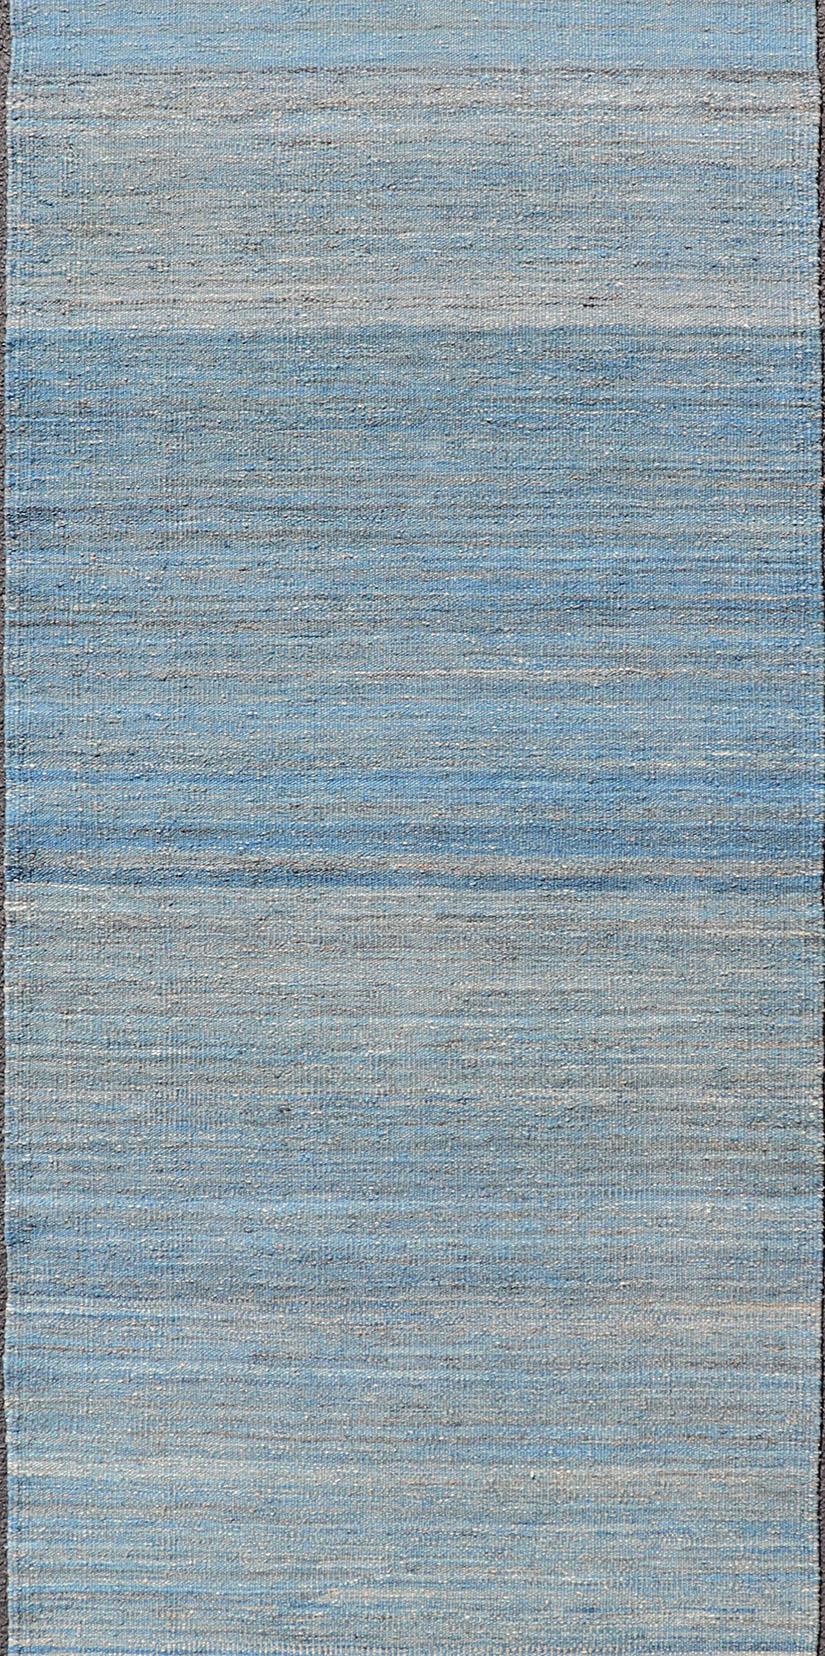 Kilim Runner Flat-Weave in Modern design in Shades of Blue, Green and Taupe For Sale